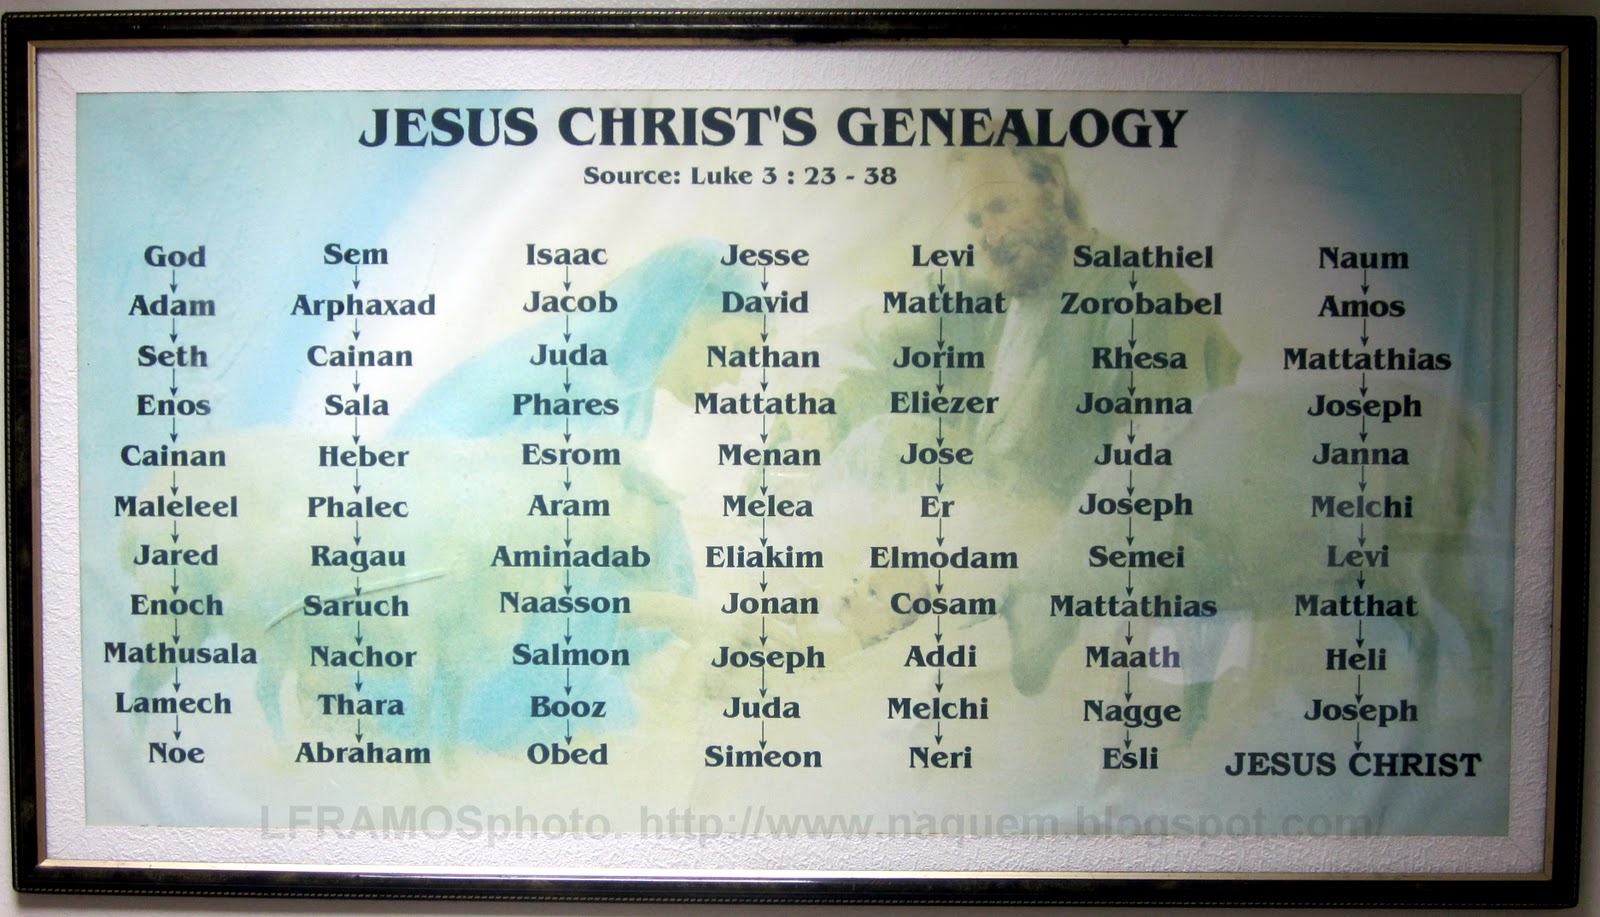 Naquem.: 77 fathers & sons in Jesus Christ's genealogy according to